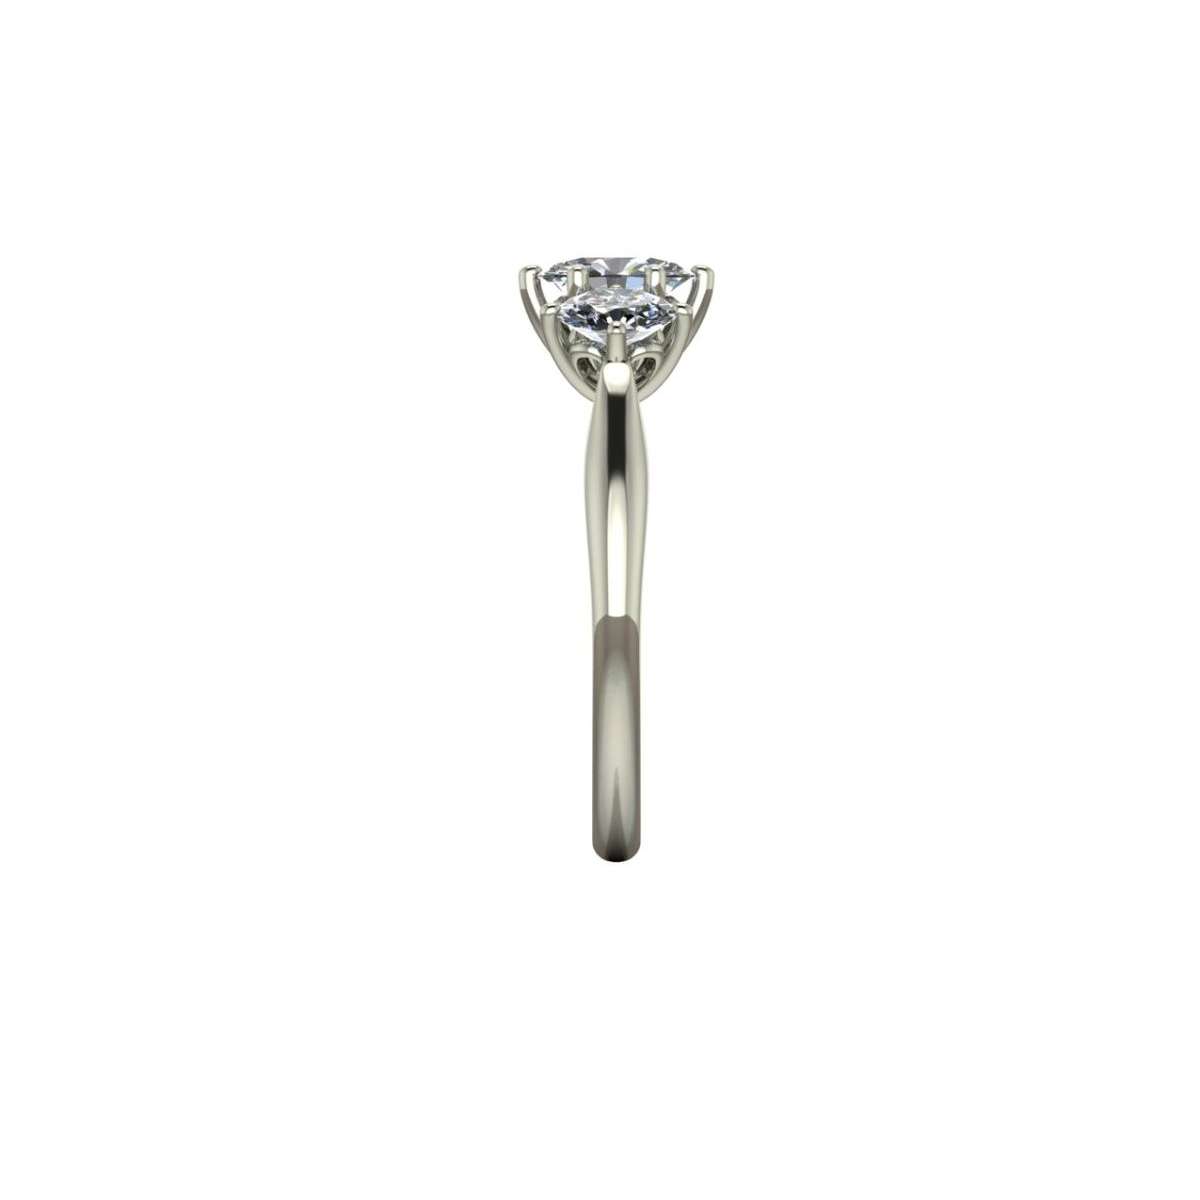 White gold triligy ring with smooth shank and bezel set 1.13 carats GIA certified oval diamonds